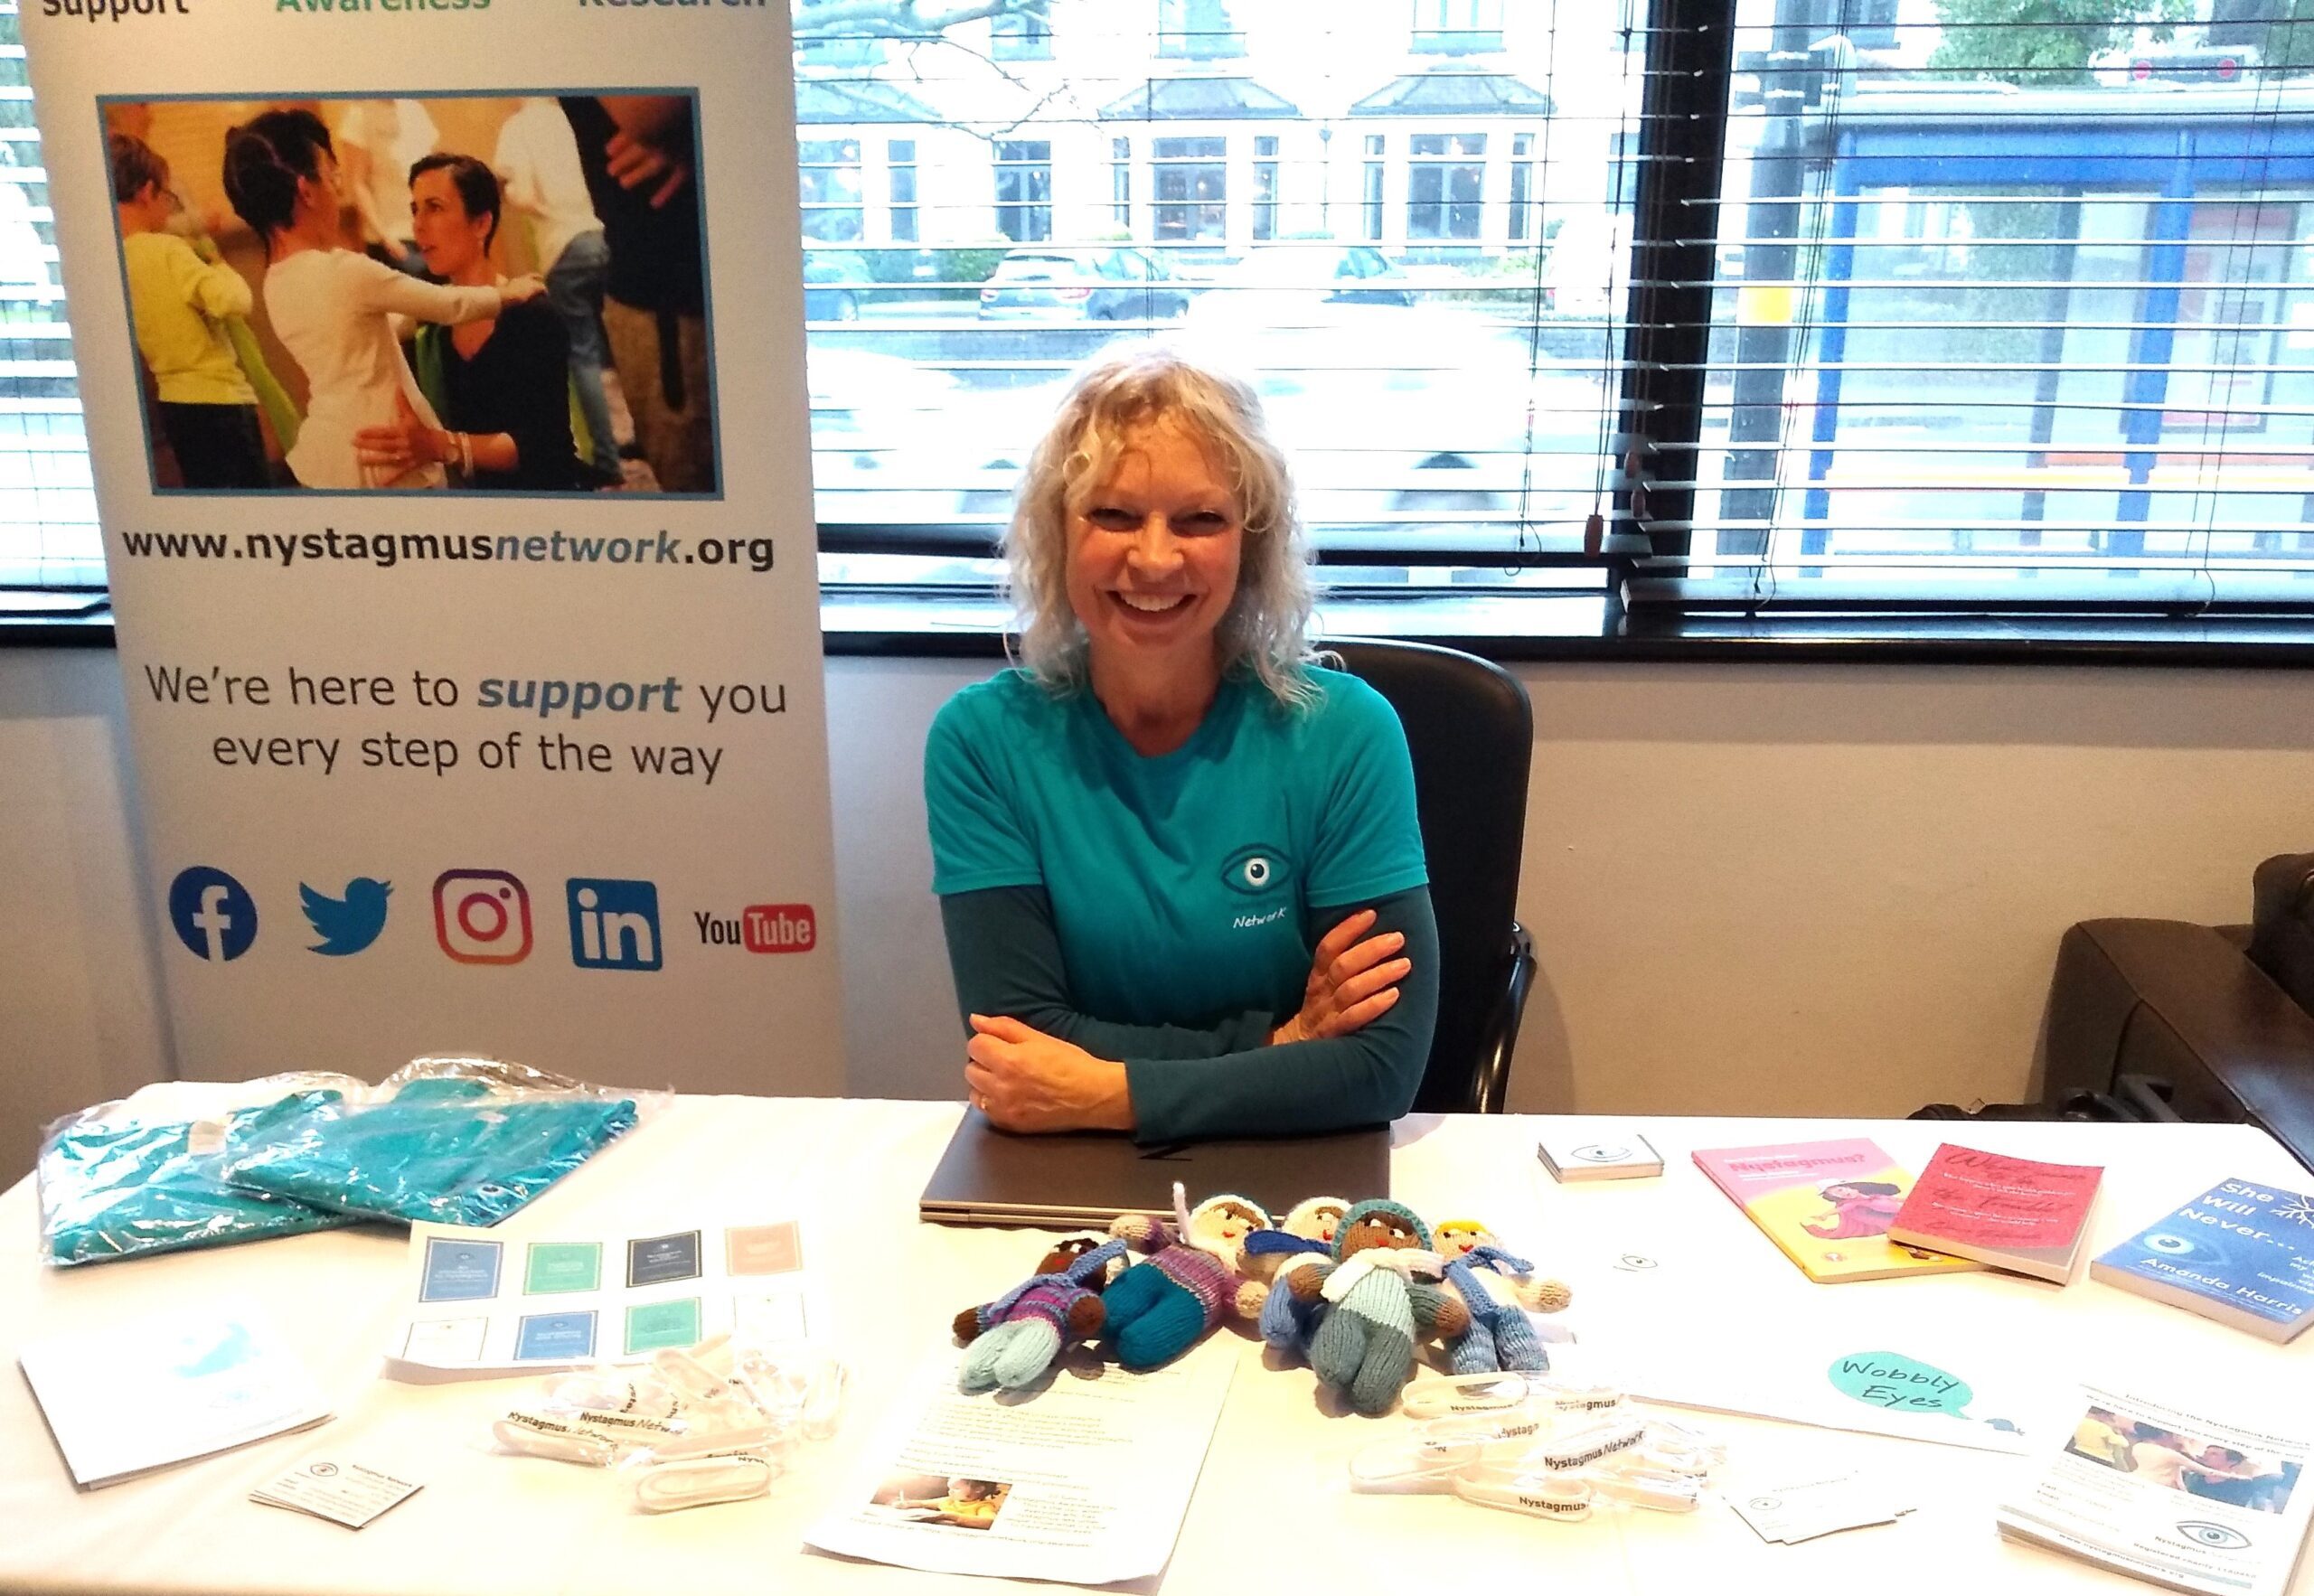 Sue wears a Nystagmus Network T-shirt and sits at her exhibition table.